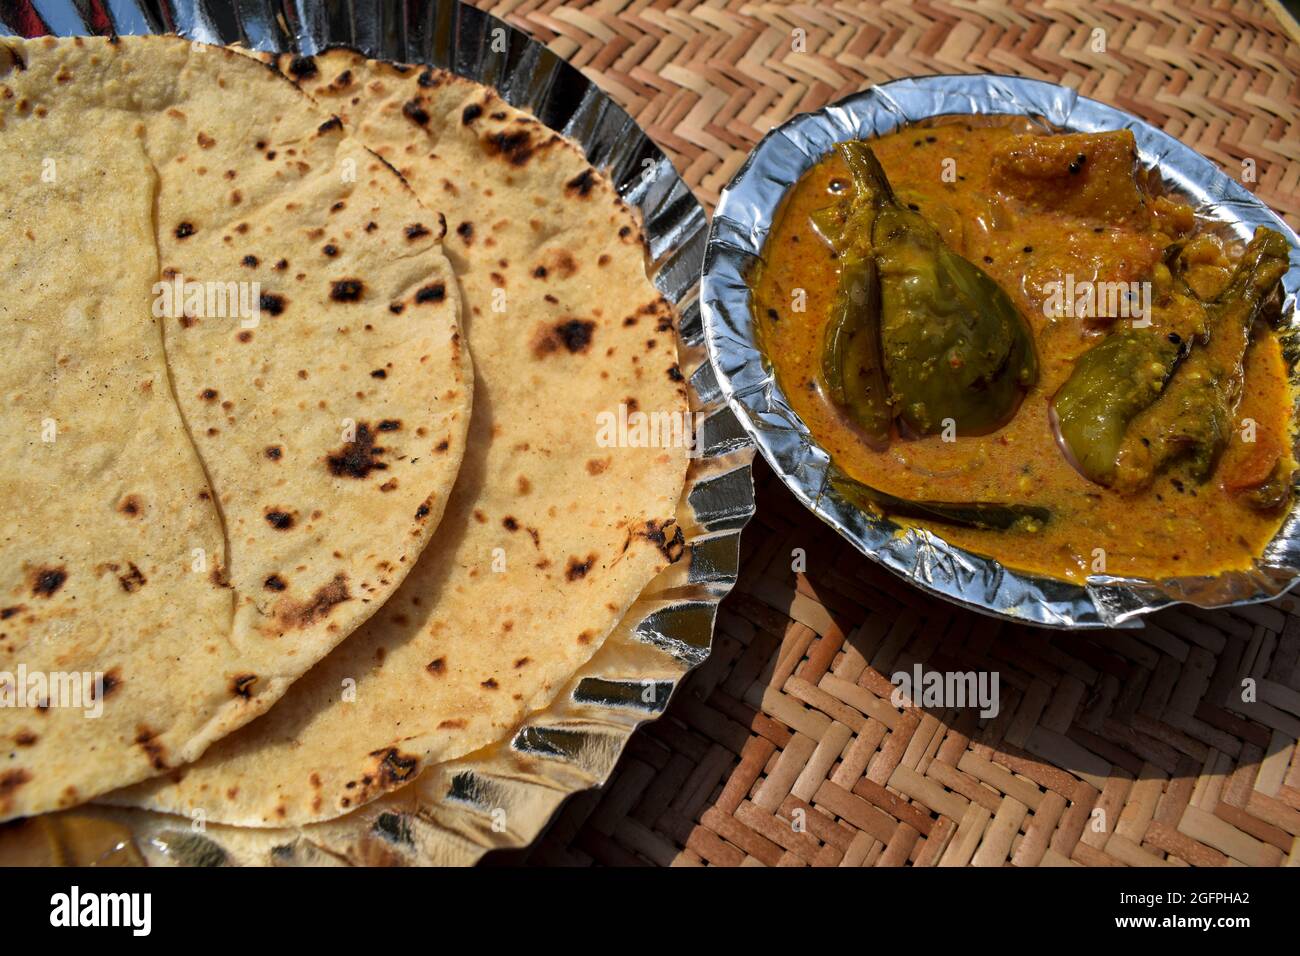 https://c8.alamy.com/comp/2GFPHA2/indian-home-cooked-dhaba-style-simple-and-traditional-food-roti-sabzi-phulka-with-potato-brinjal-curry-2GFPHA2.jpg